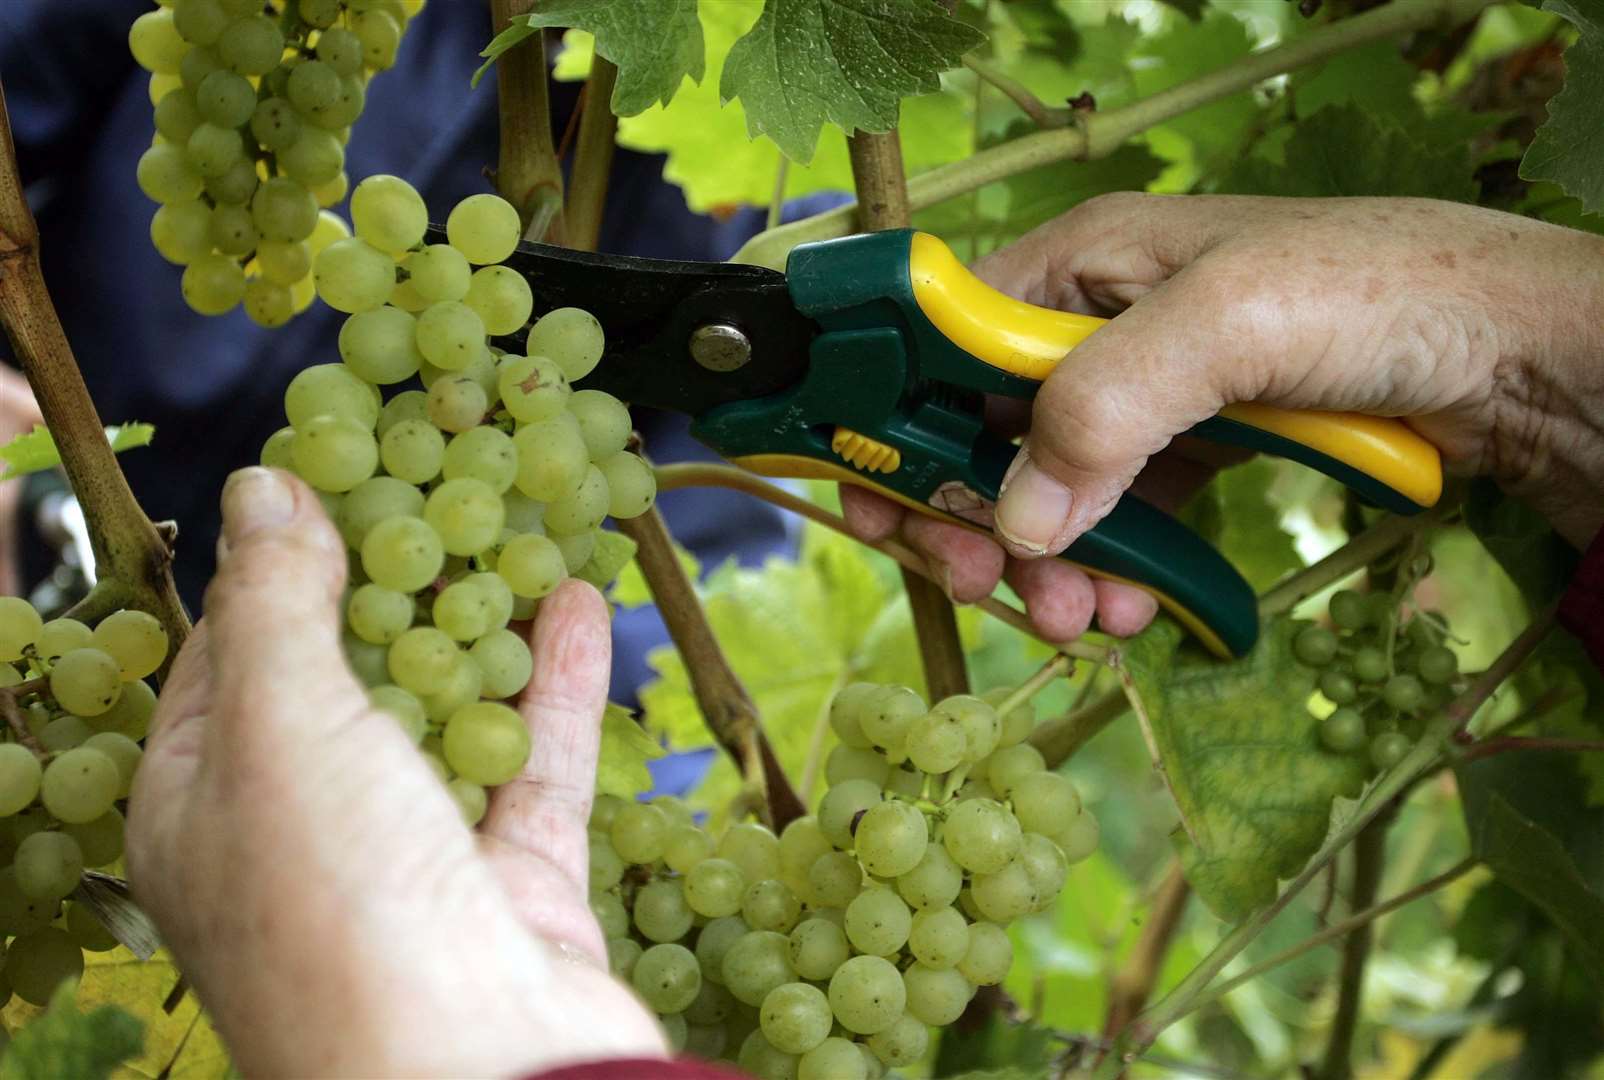 The grape harvest is set to deliver a bumper crop this year - enhancing the optimism among Kent's wine producers